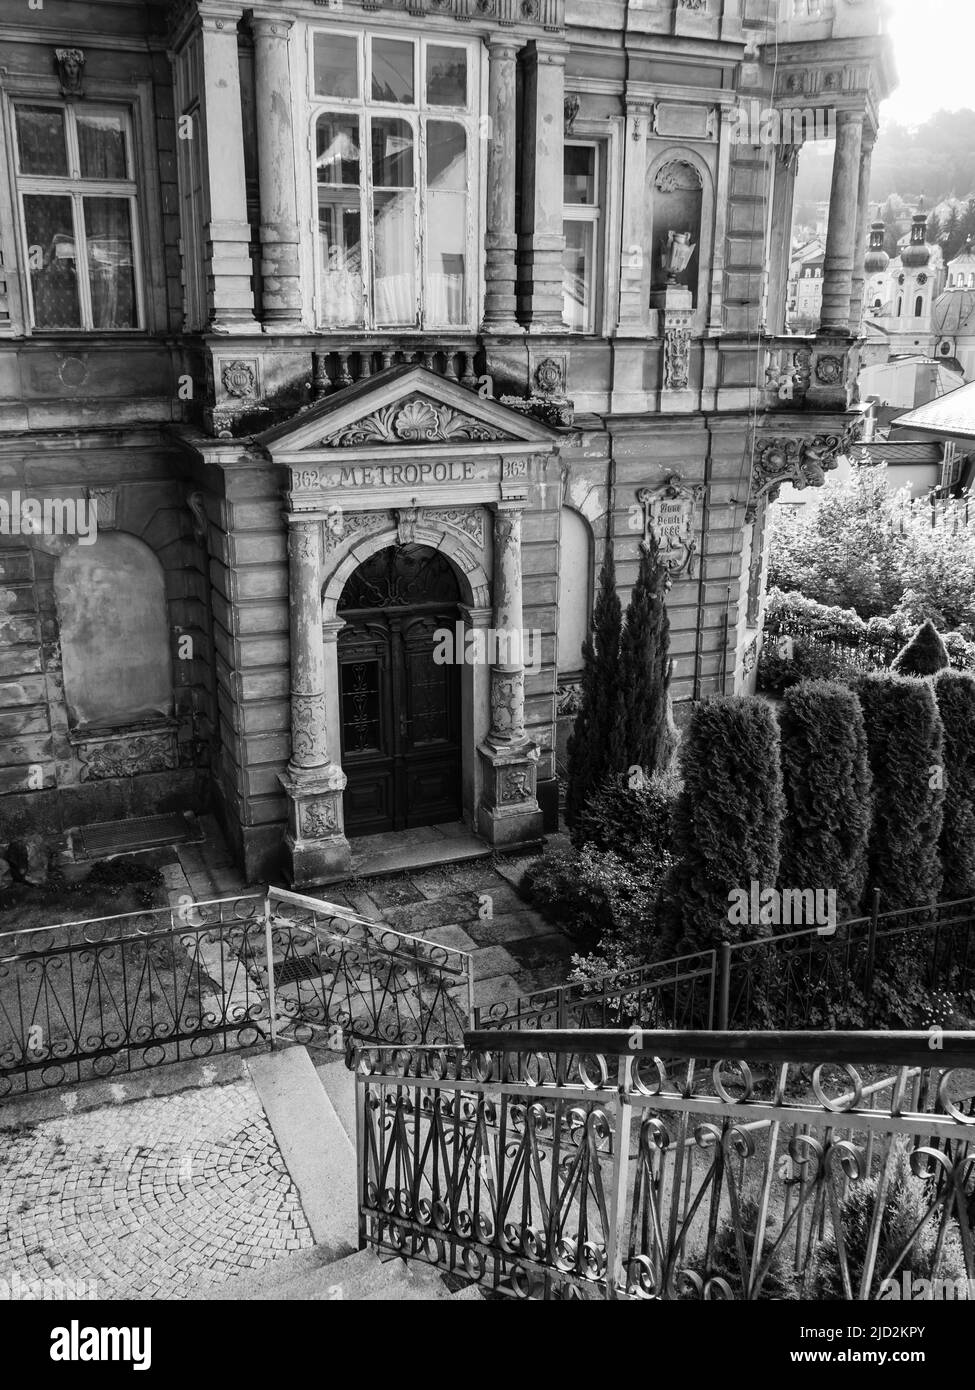 House Dum Metropole Old Building in Carlsbad or Karlovy Vary, Bohemia, Czech Republic Stock Photo